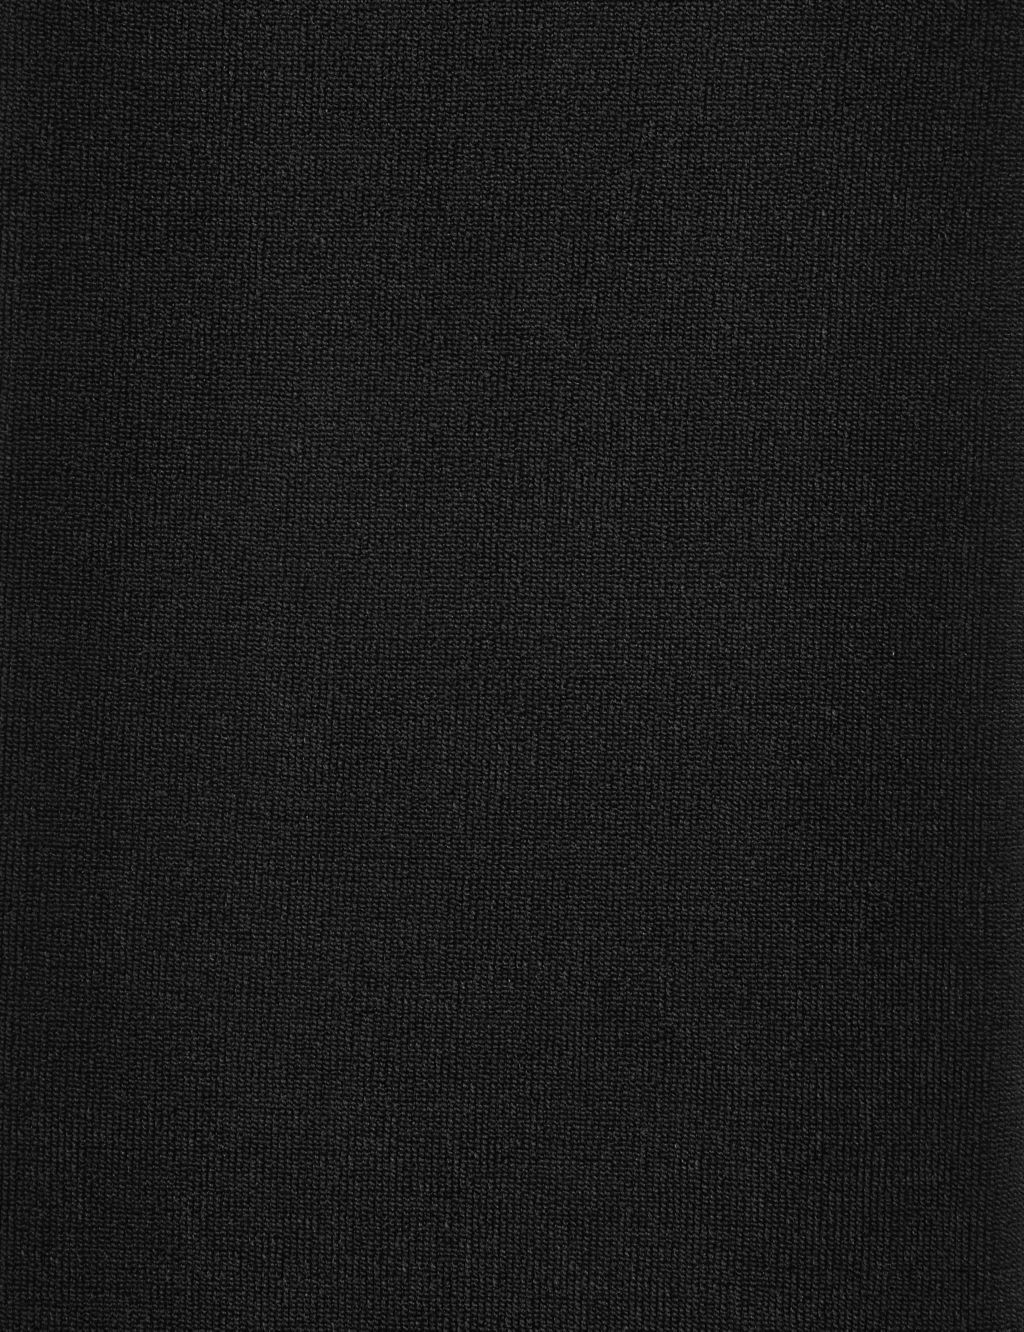 200 Denier Thermal Fleece Lined Tights image 3